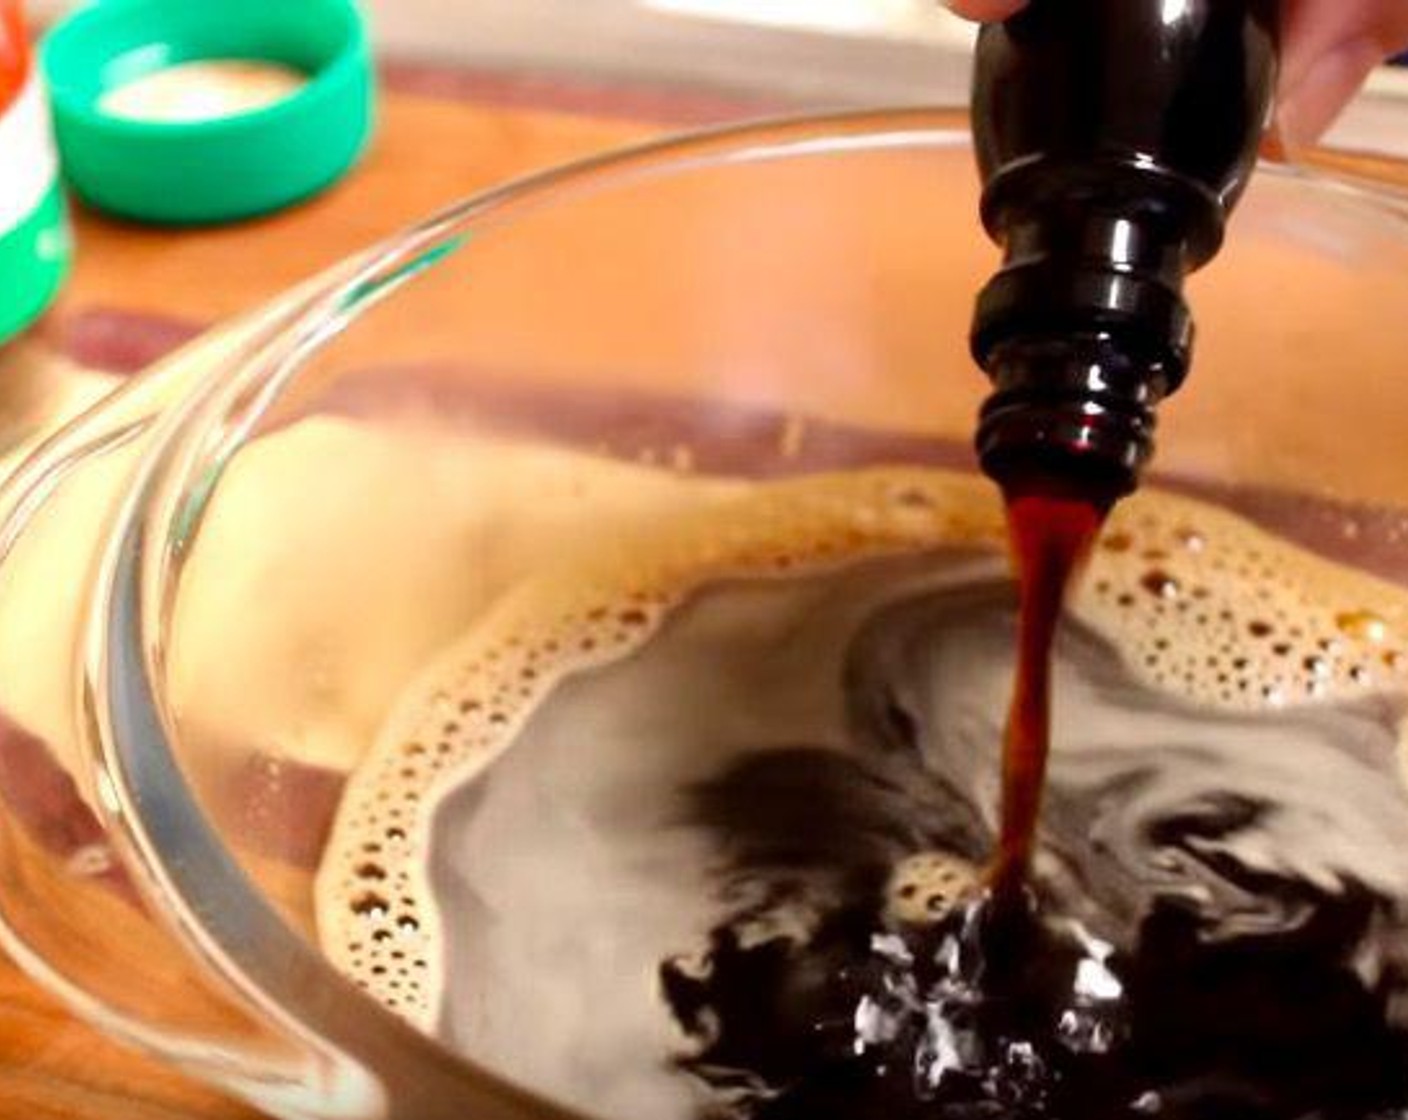 step 1 In a small bowl, bring Water (6 fl oz) to a boil and add in Instant Espresso Powder (1/2 Tbsp). Whisk until dissolved and add in Kahlua (3 Tbsp). Set aside to cool.